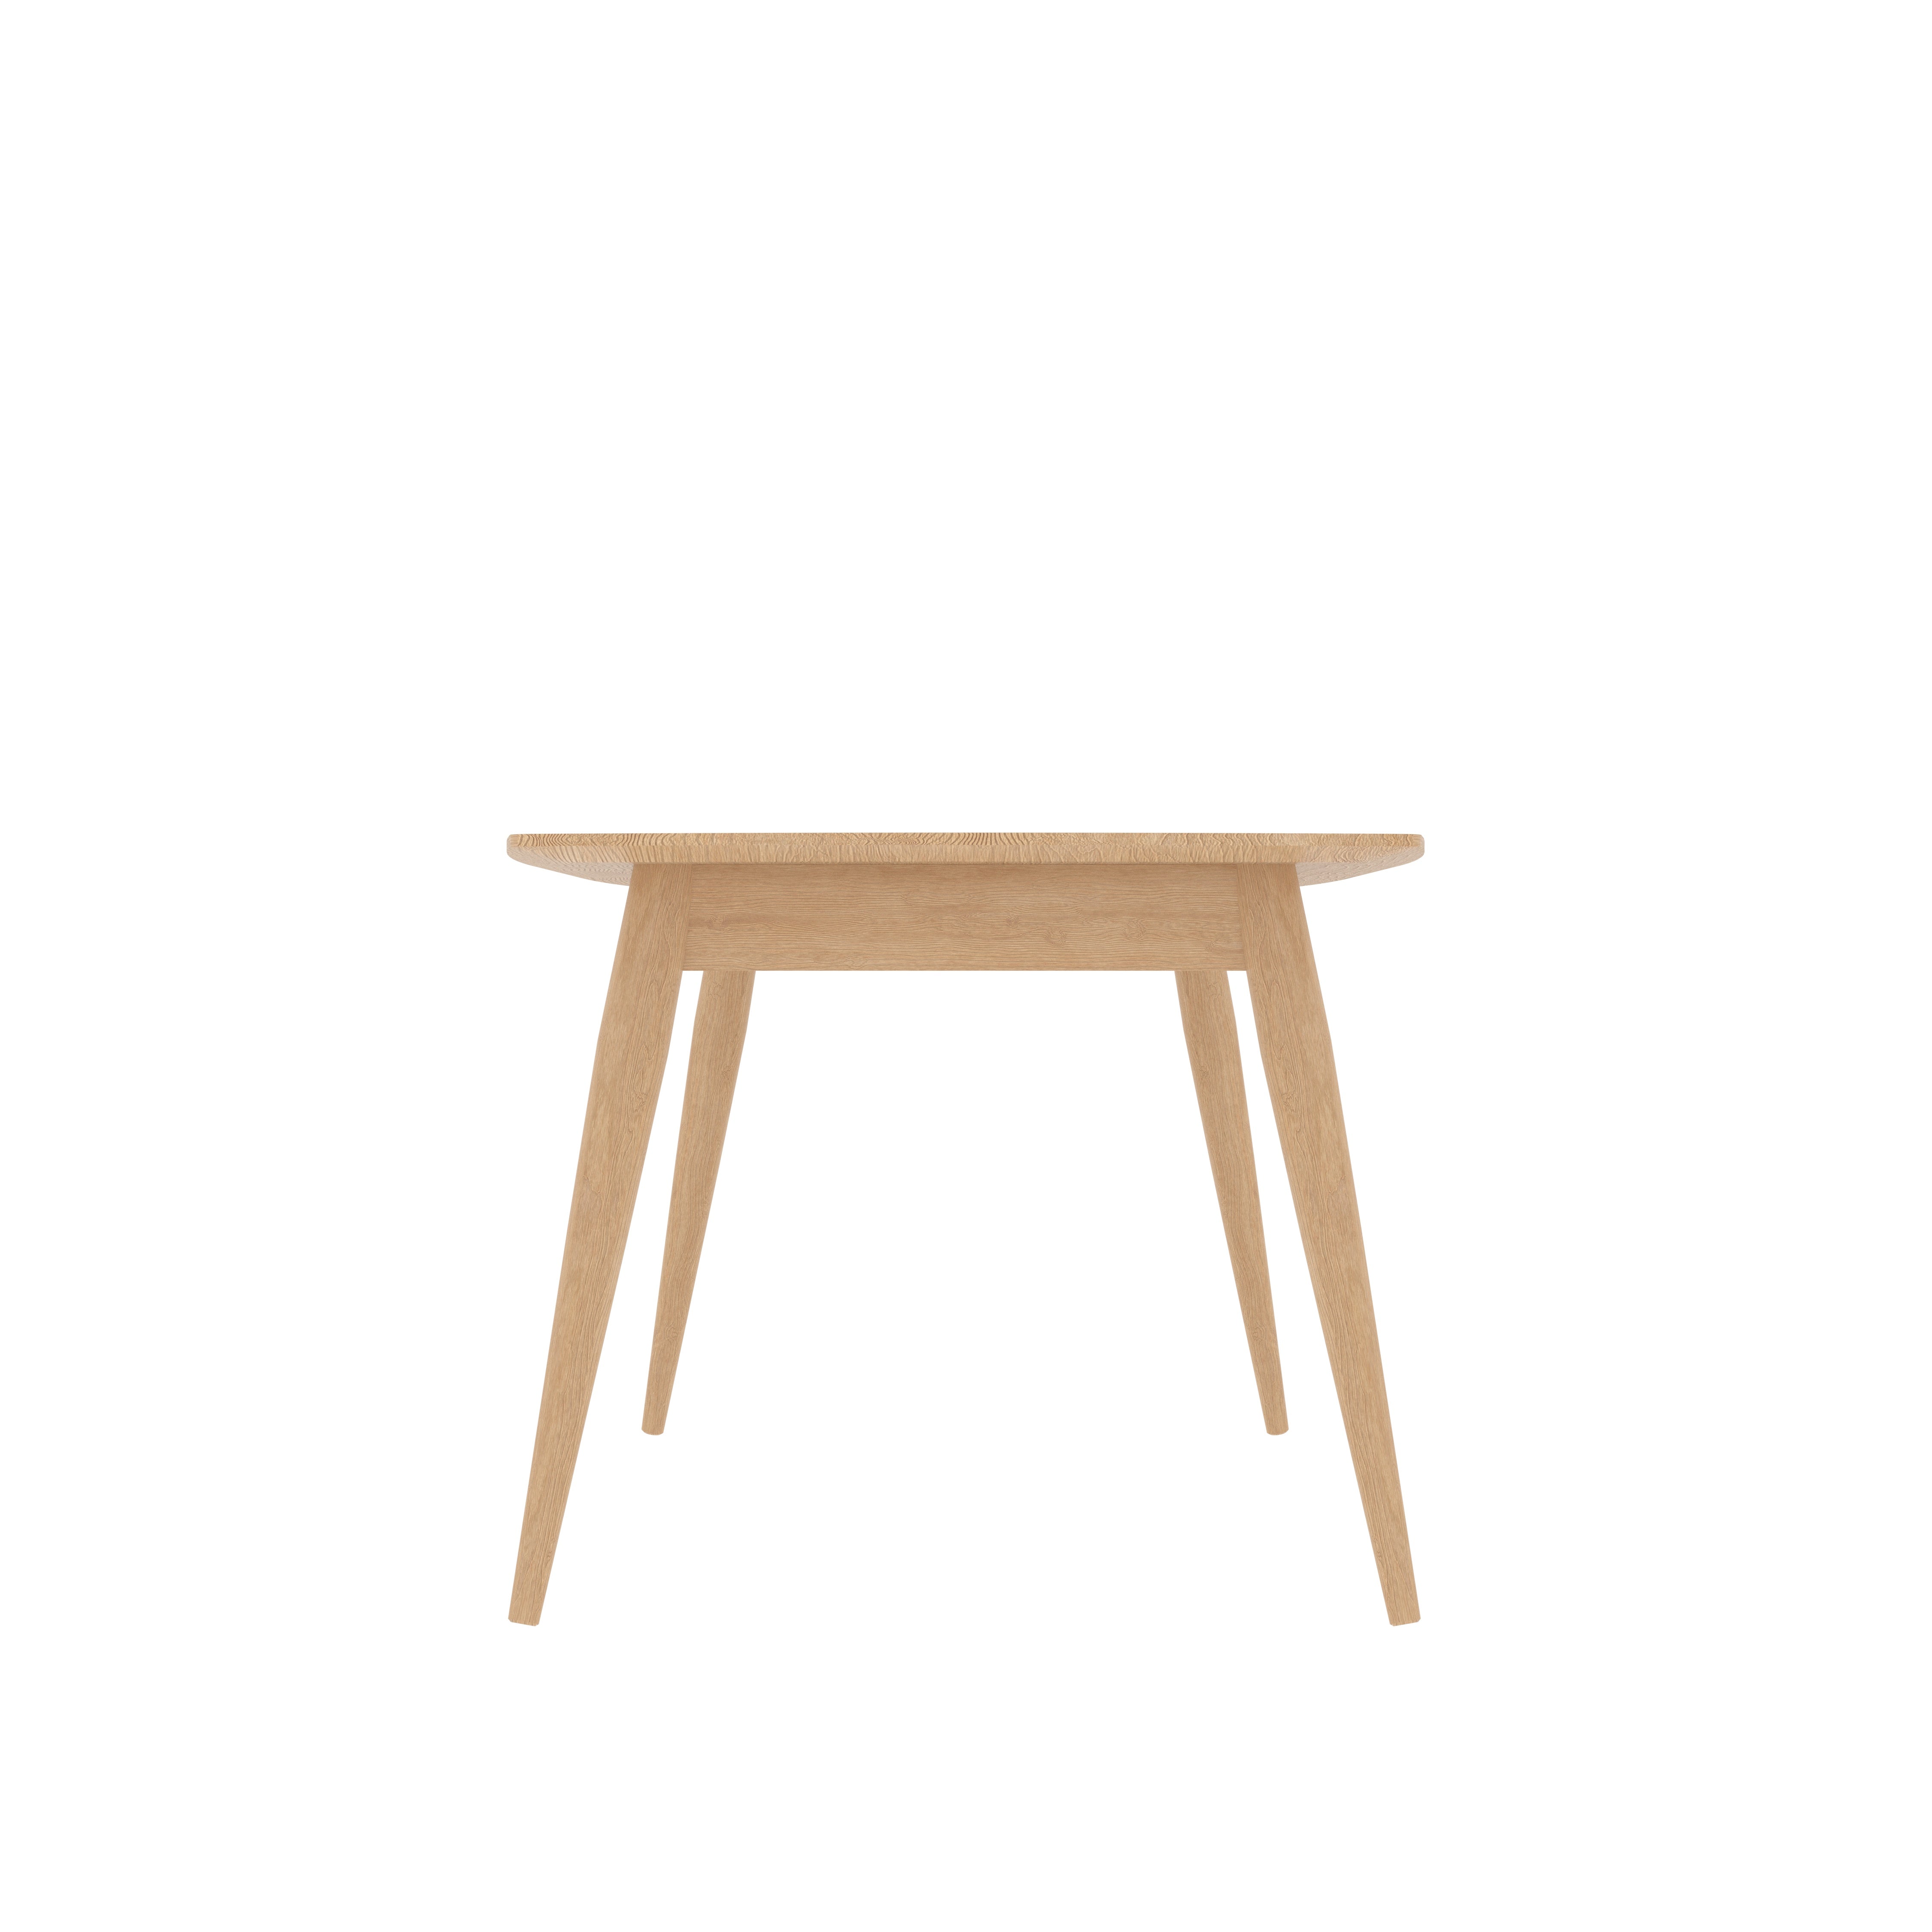 Simple design dining table made of oak wood Dining Table